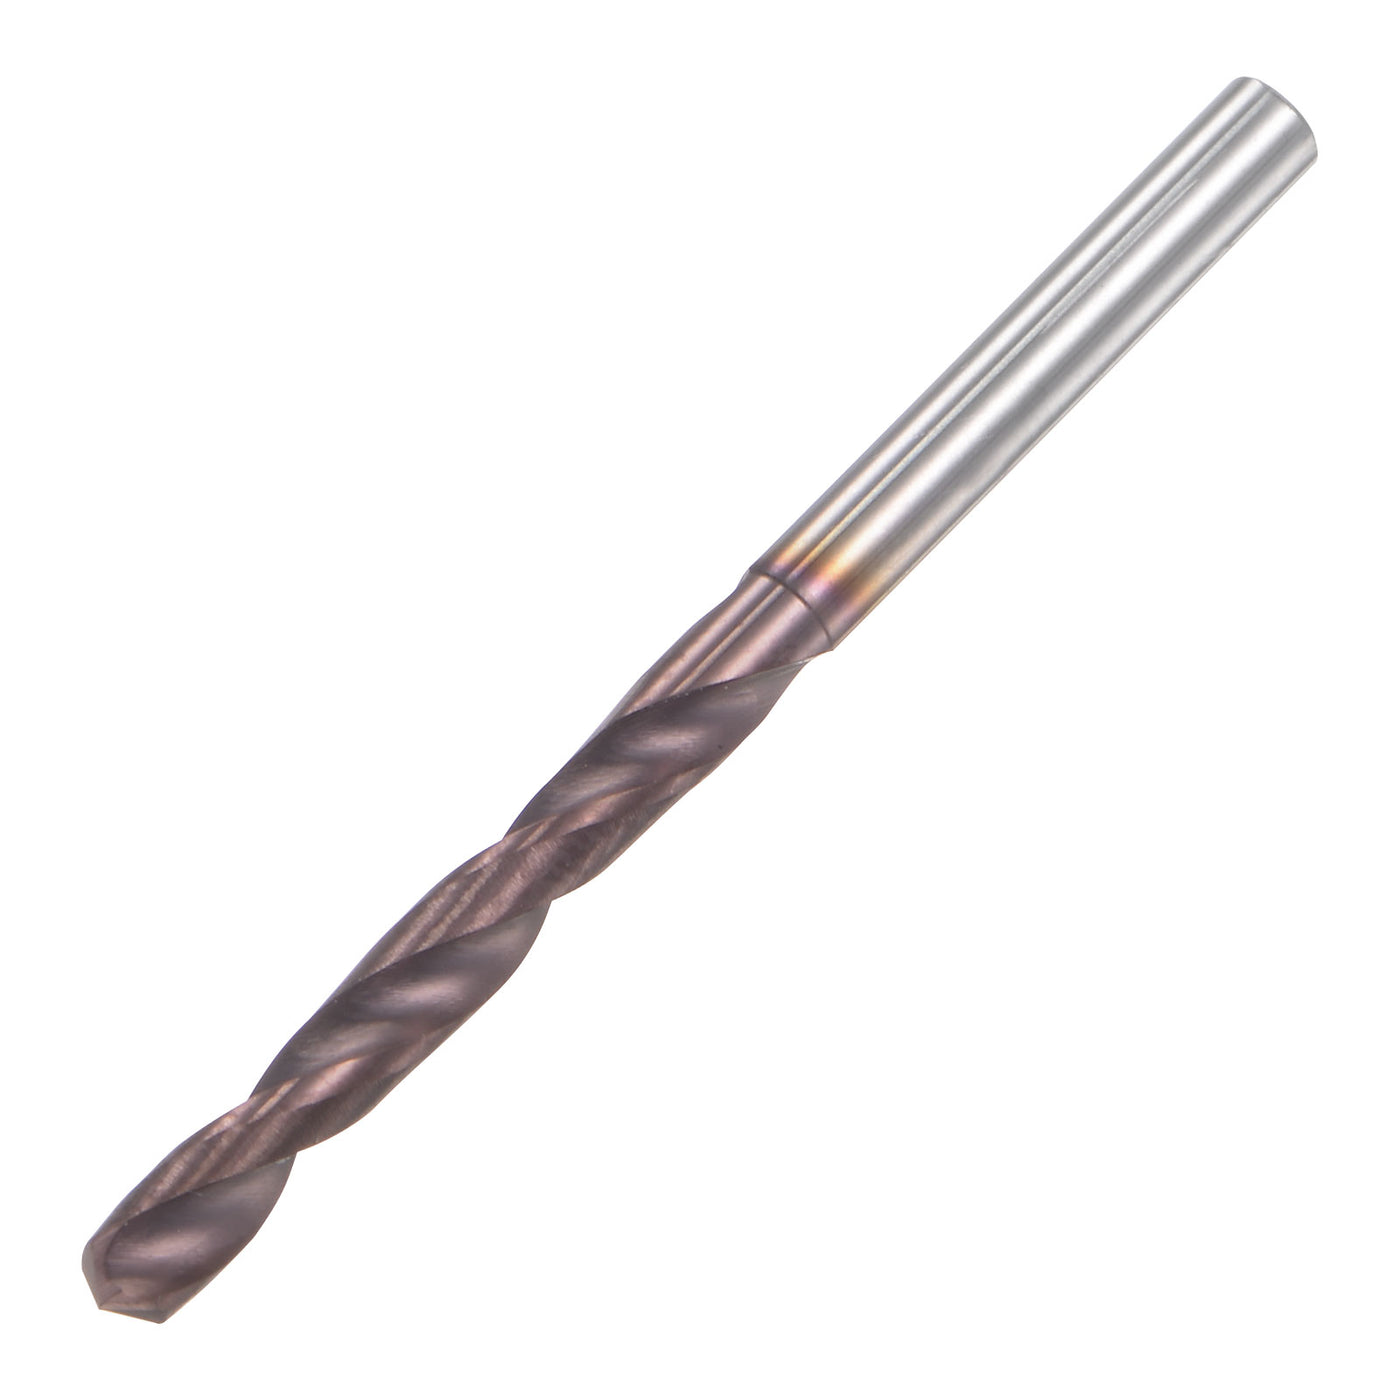 uxcell Uxcell 2.6mm DIN K45 Tungsten Carbide AlTiSin Coated Drill Bit for Stainless Steel